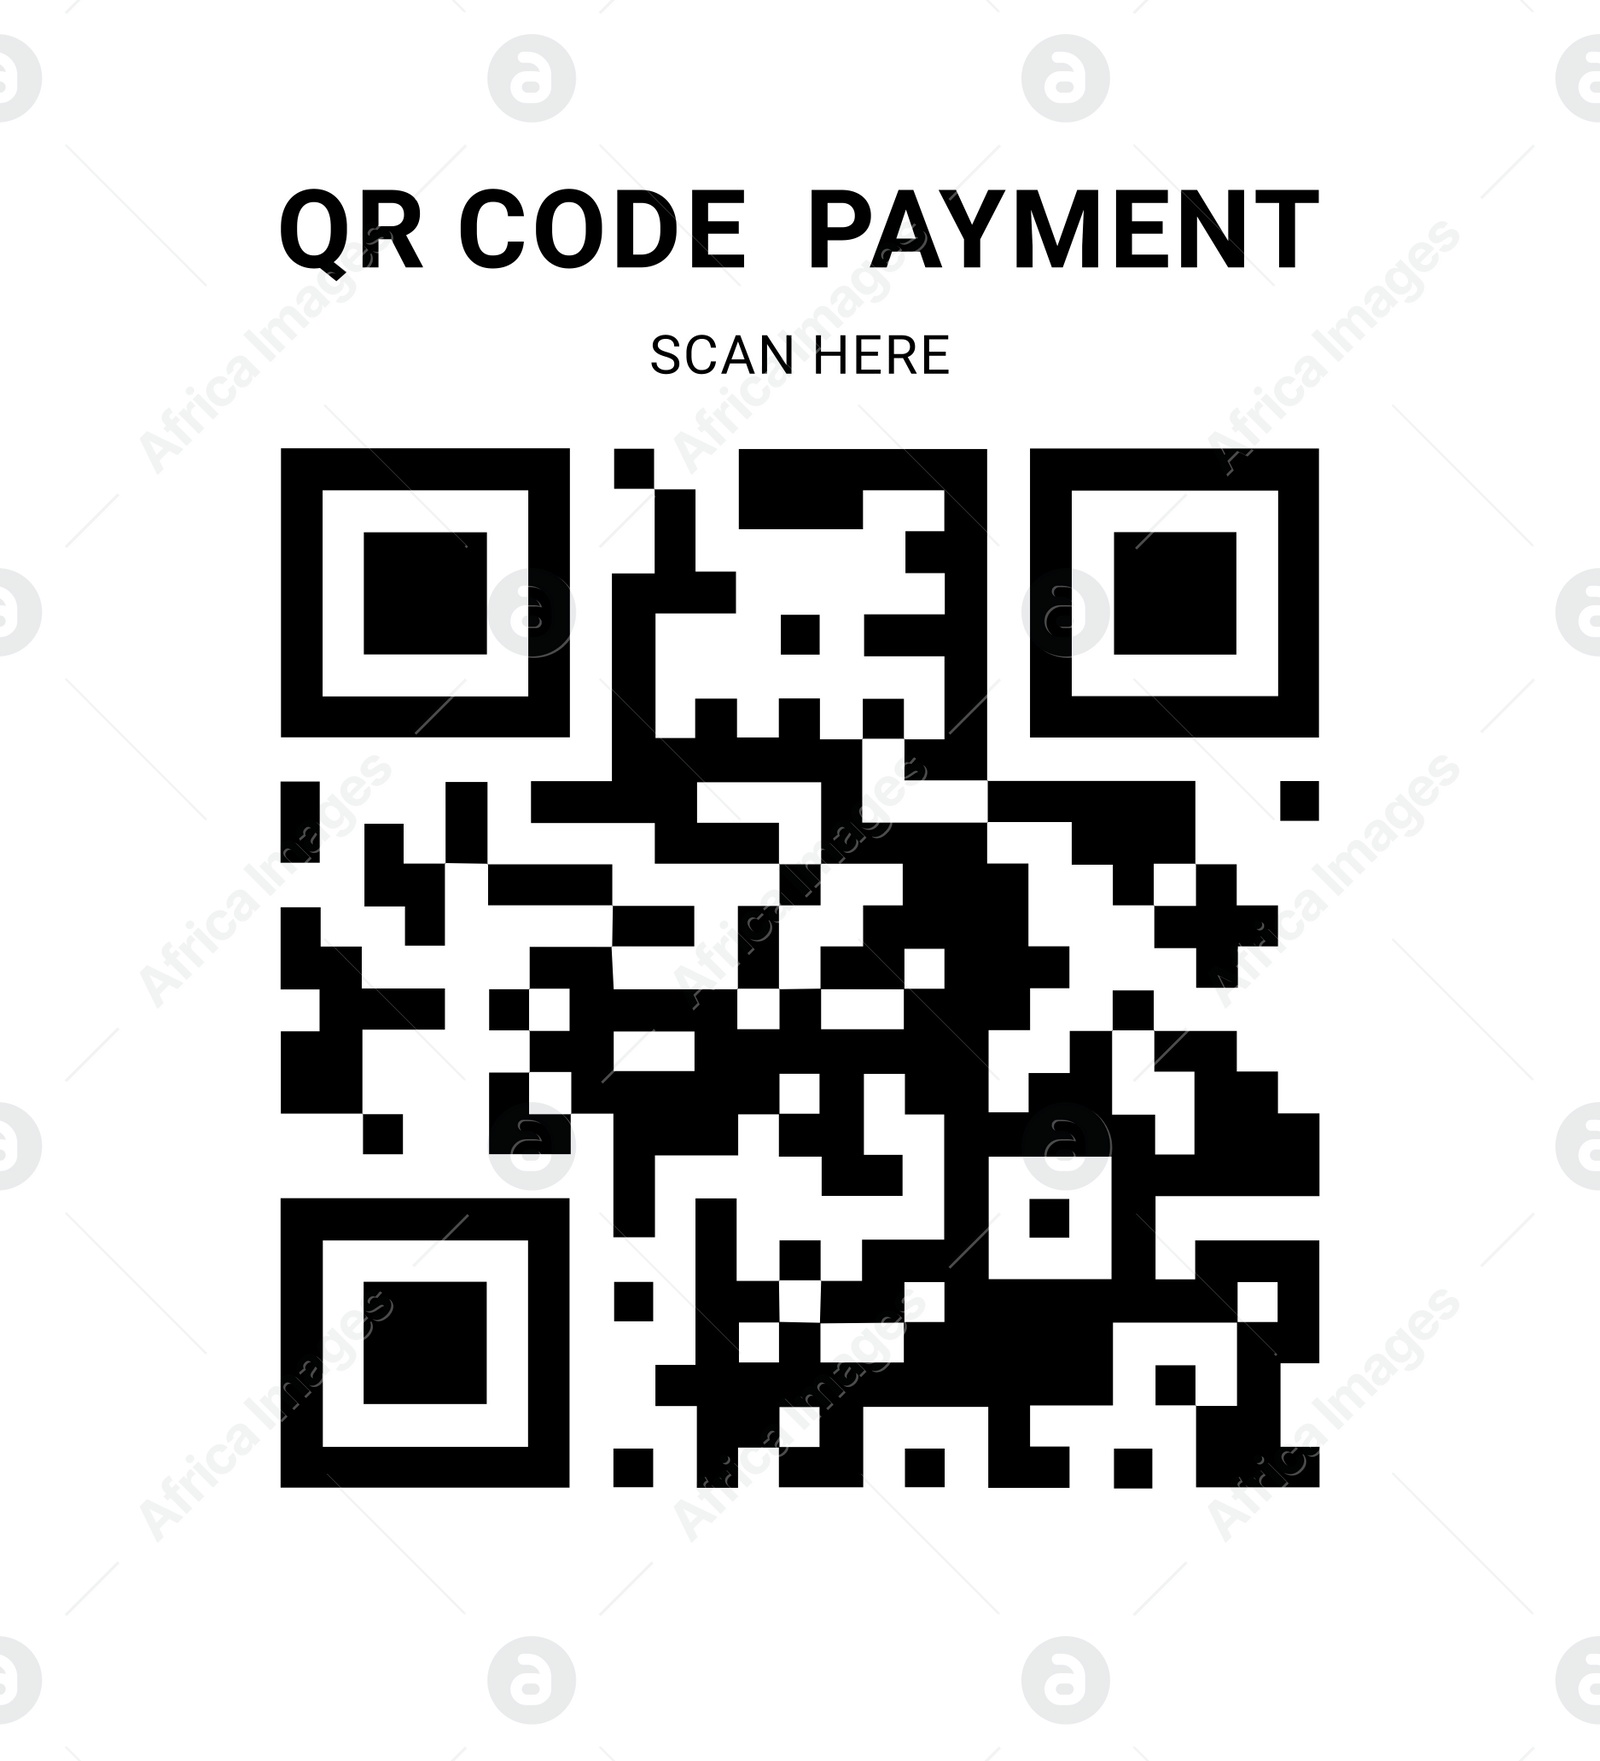 Illustration of Scan QR code for contactless payment, illustration